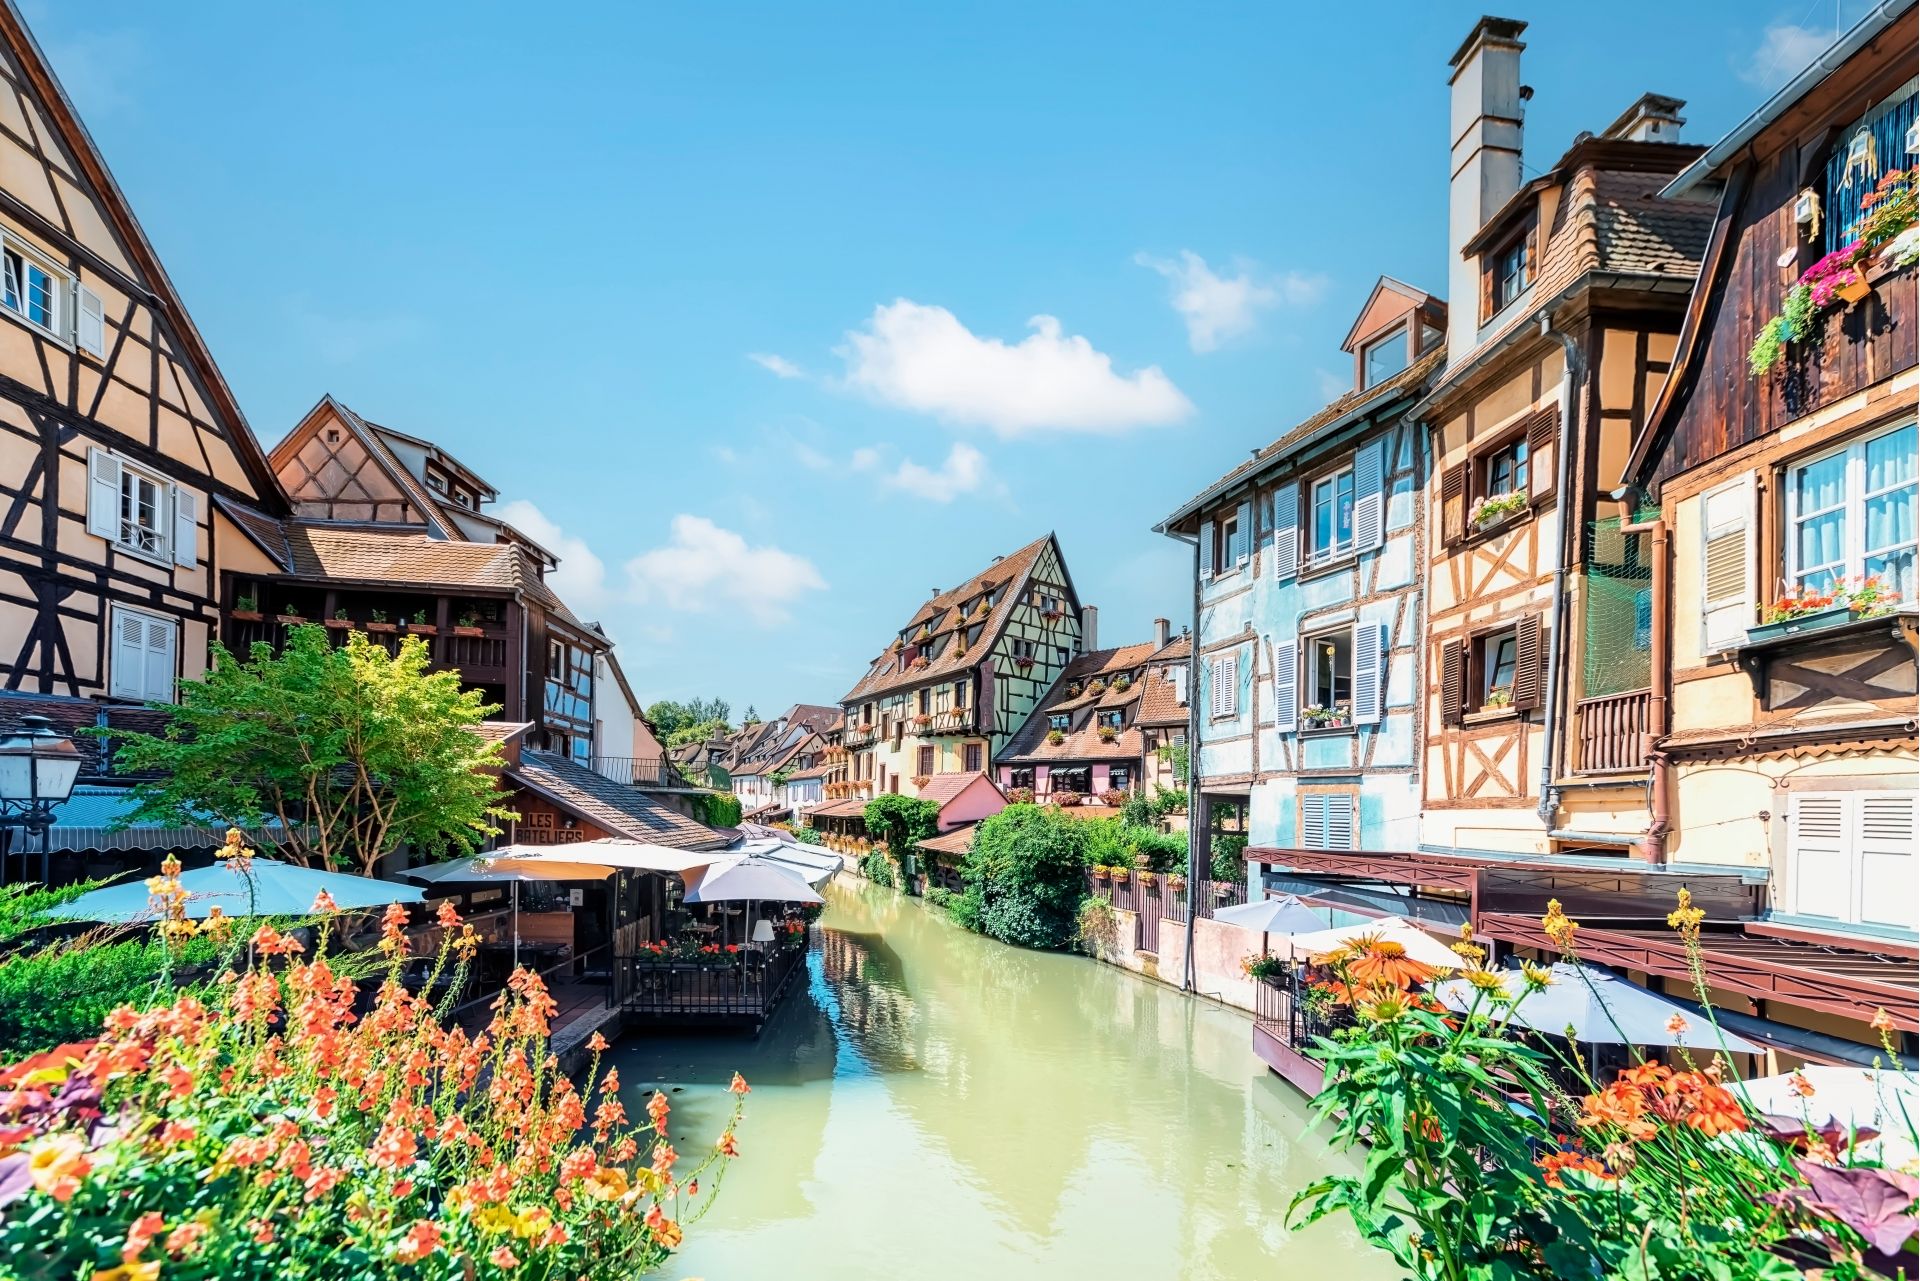 Architecture In The Town Of Colmar, France